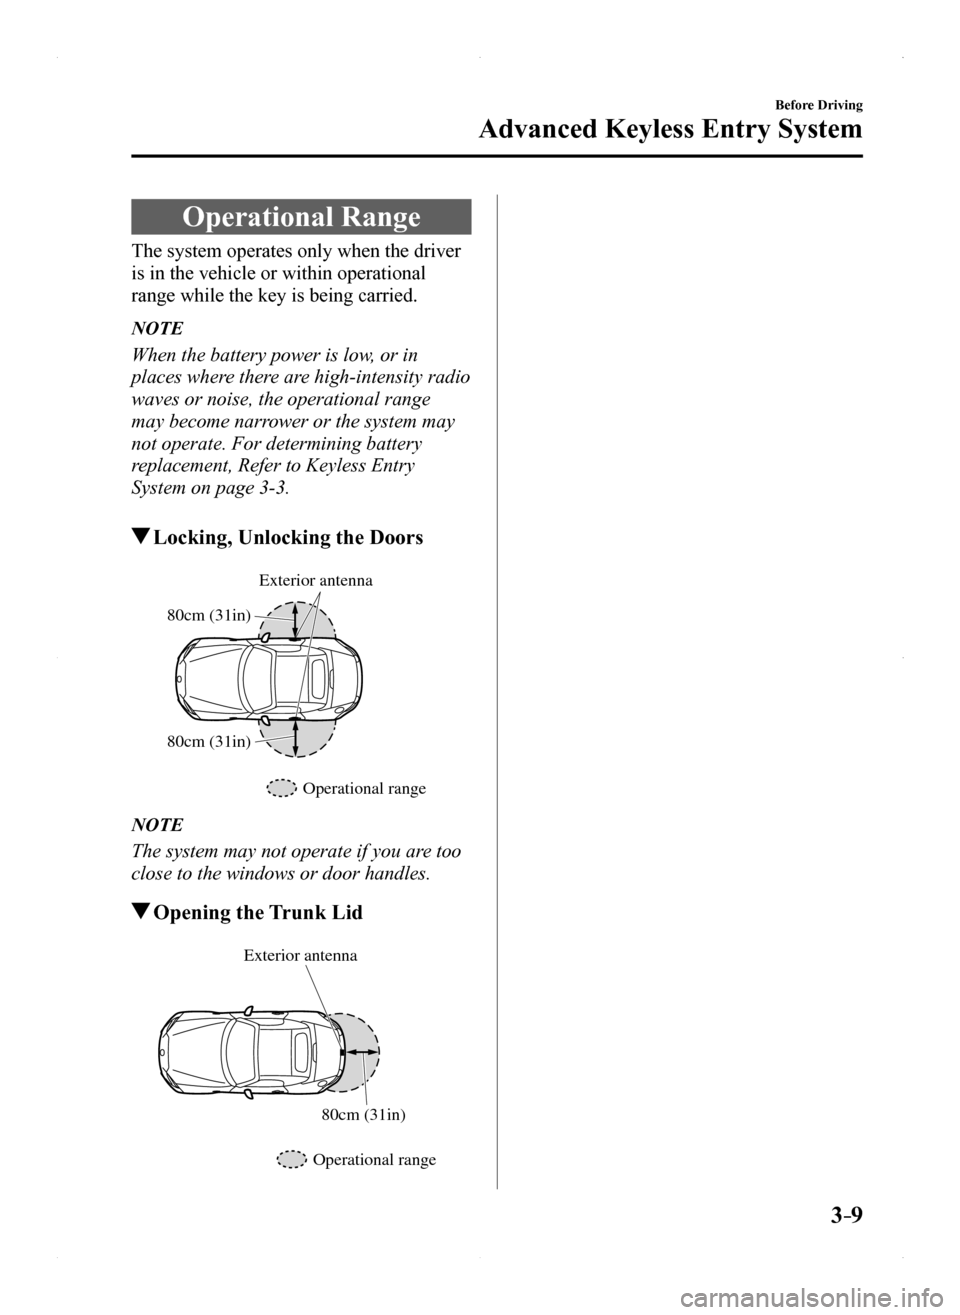 MAZDA MODEL MX-5 2016  Owners Manual (in English) 3–9
Before Driving
Advanced Keyless Entry System
Operational Range
The system operates only when the driver 
is in the vehicle or within operational 
range while the key is being carried.
NOTE
When 